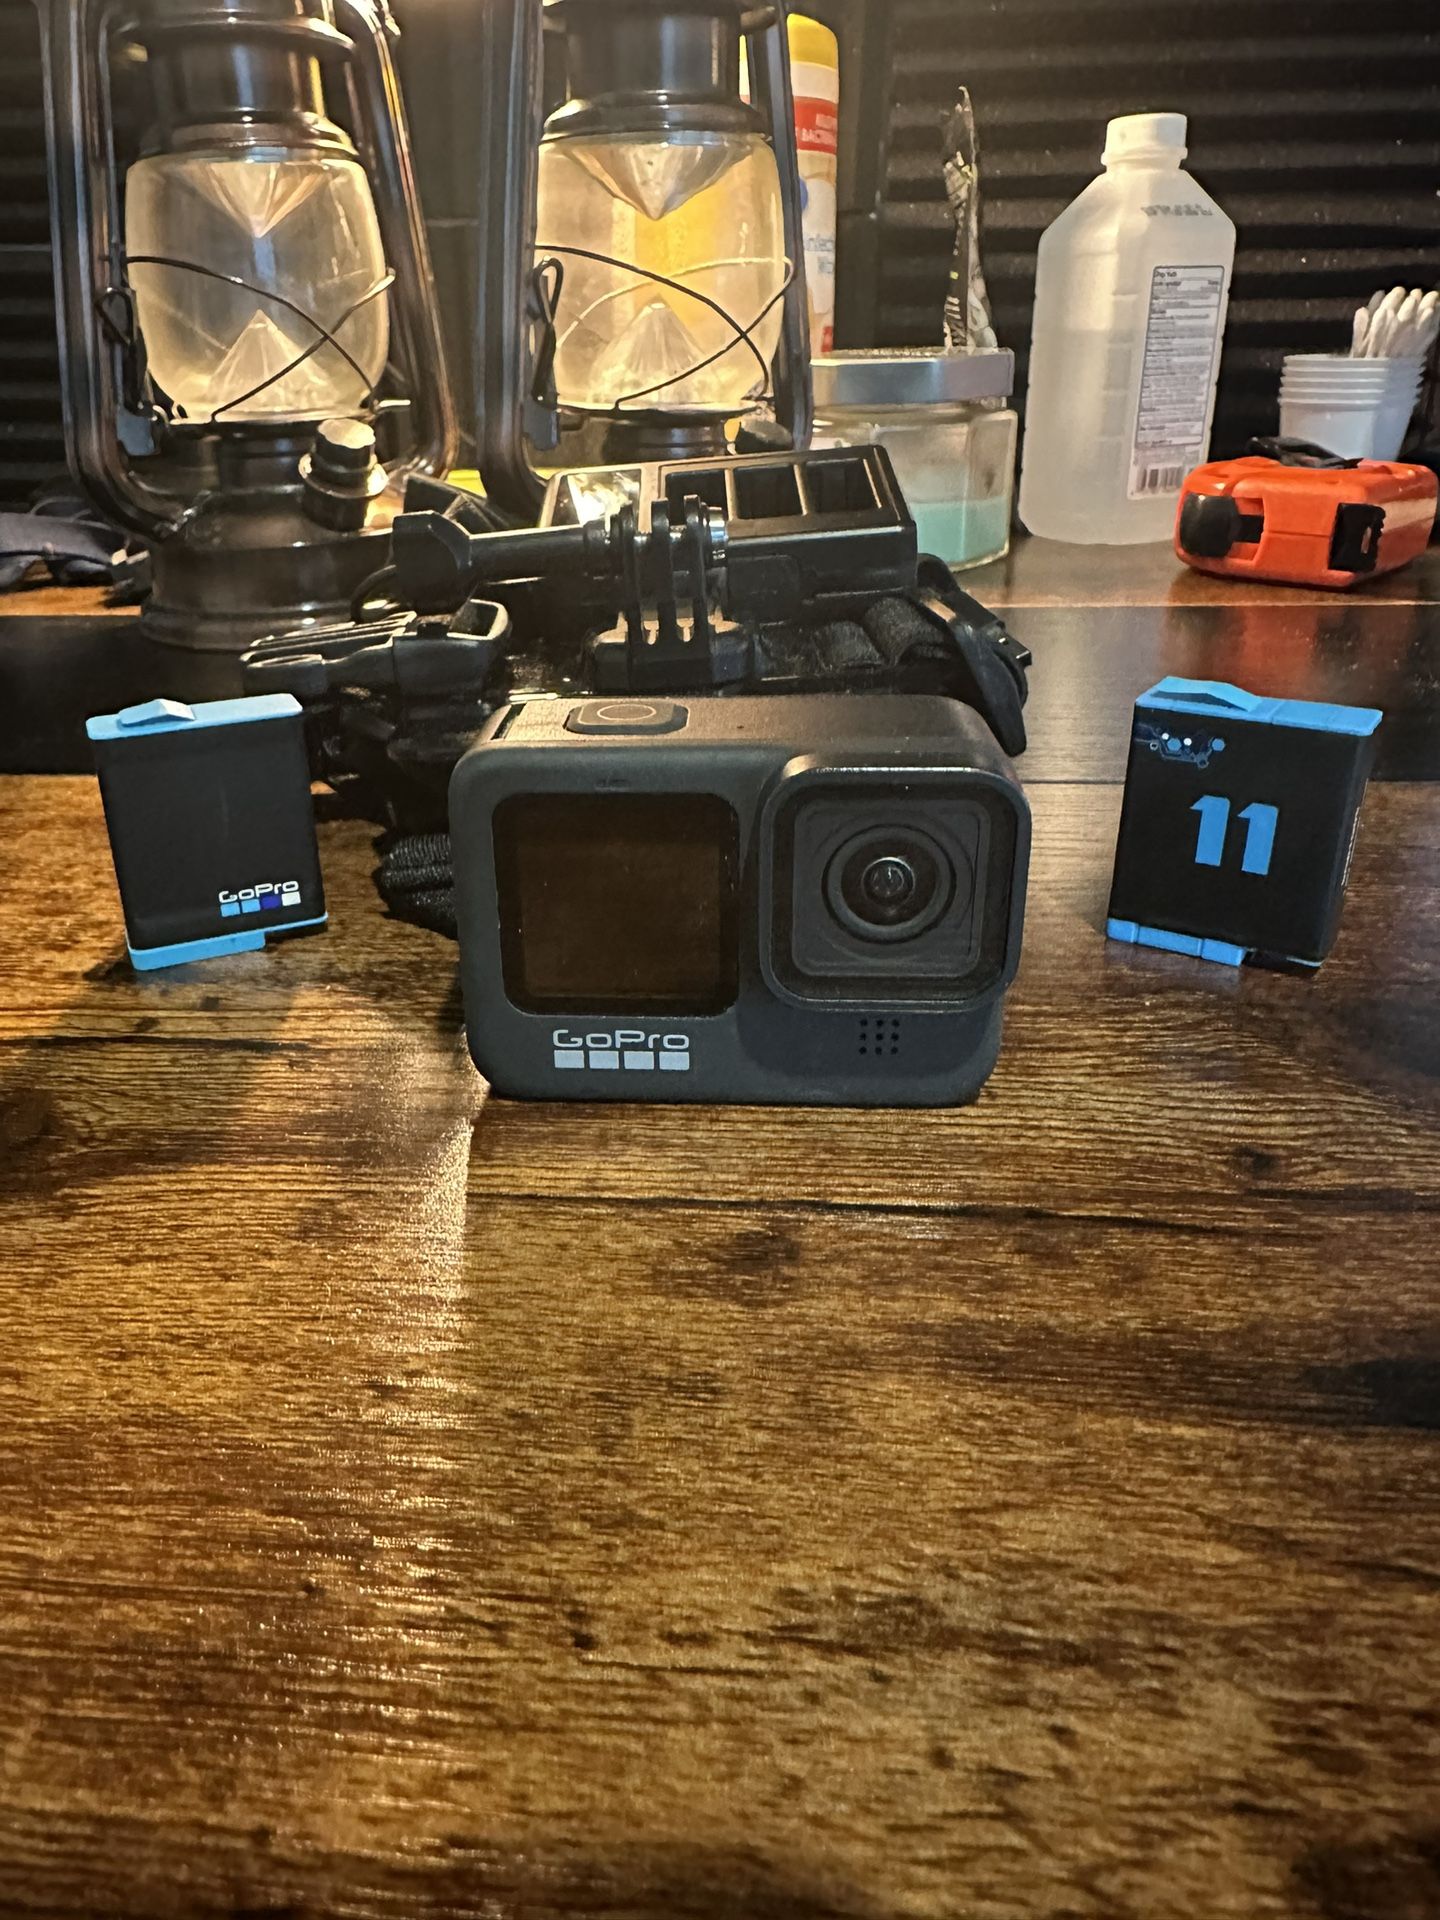 GoPro Hero 9 FOR TRADE for Old Video Games